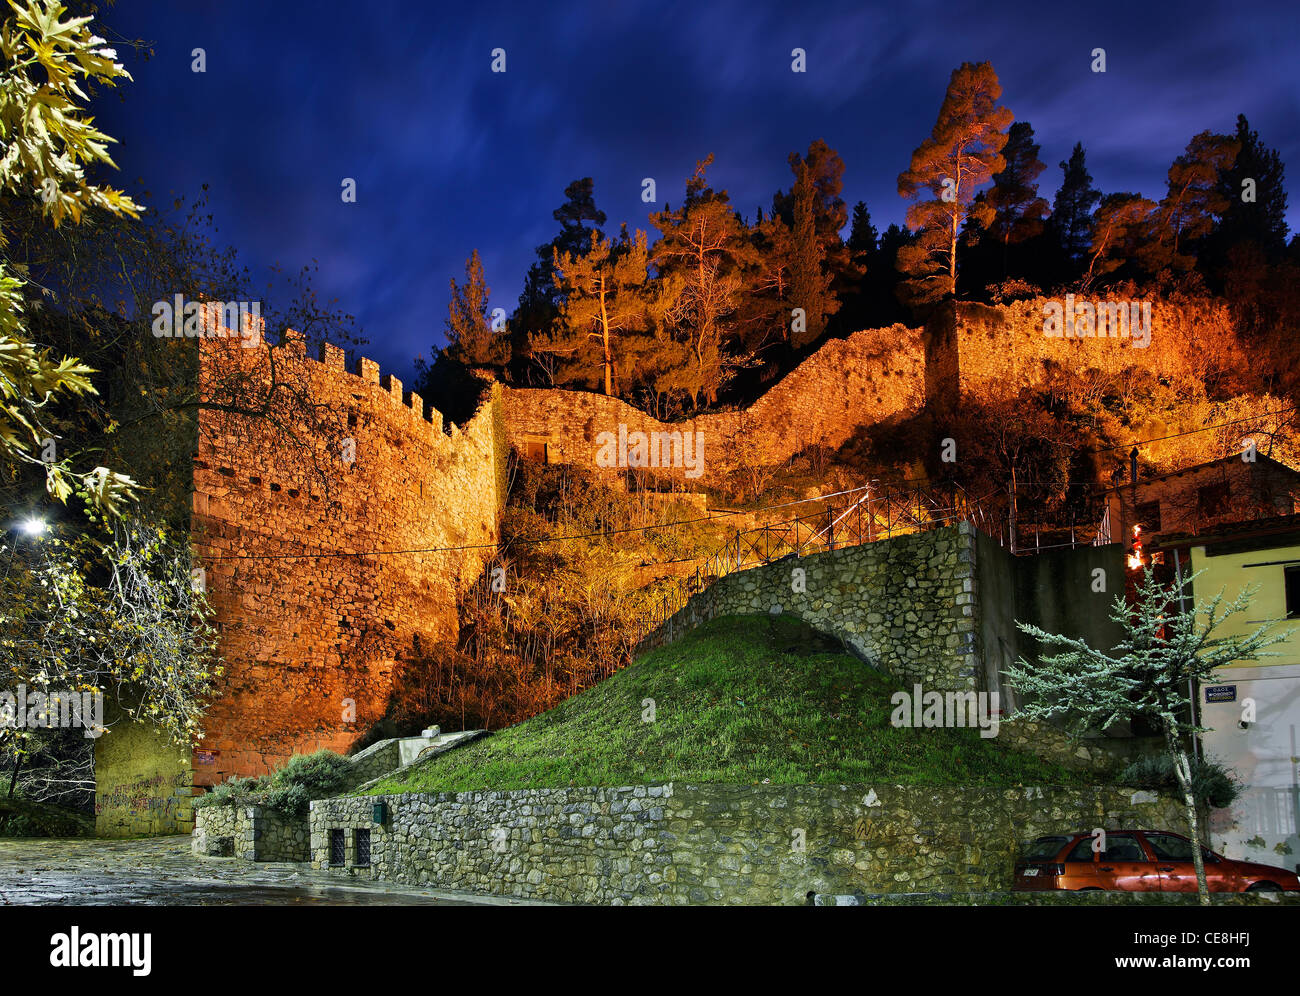 The Catalan castle of Livadia town, Viotia, Central Greece, right next to Krya springs and Erkyna river at night Stock Photo